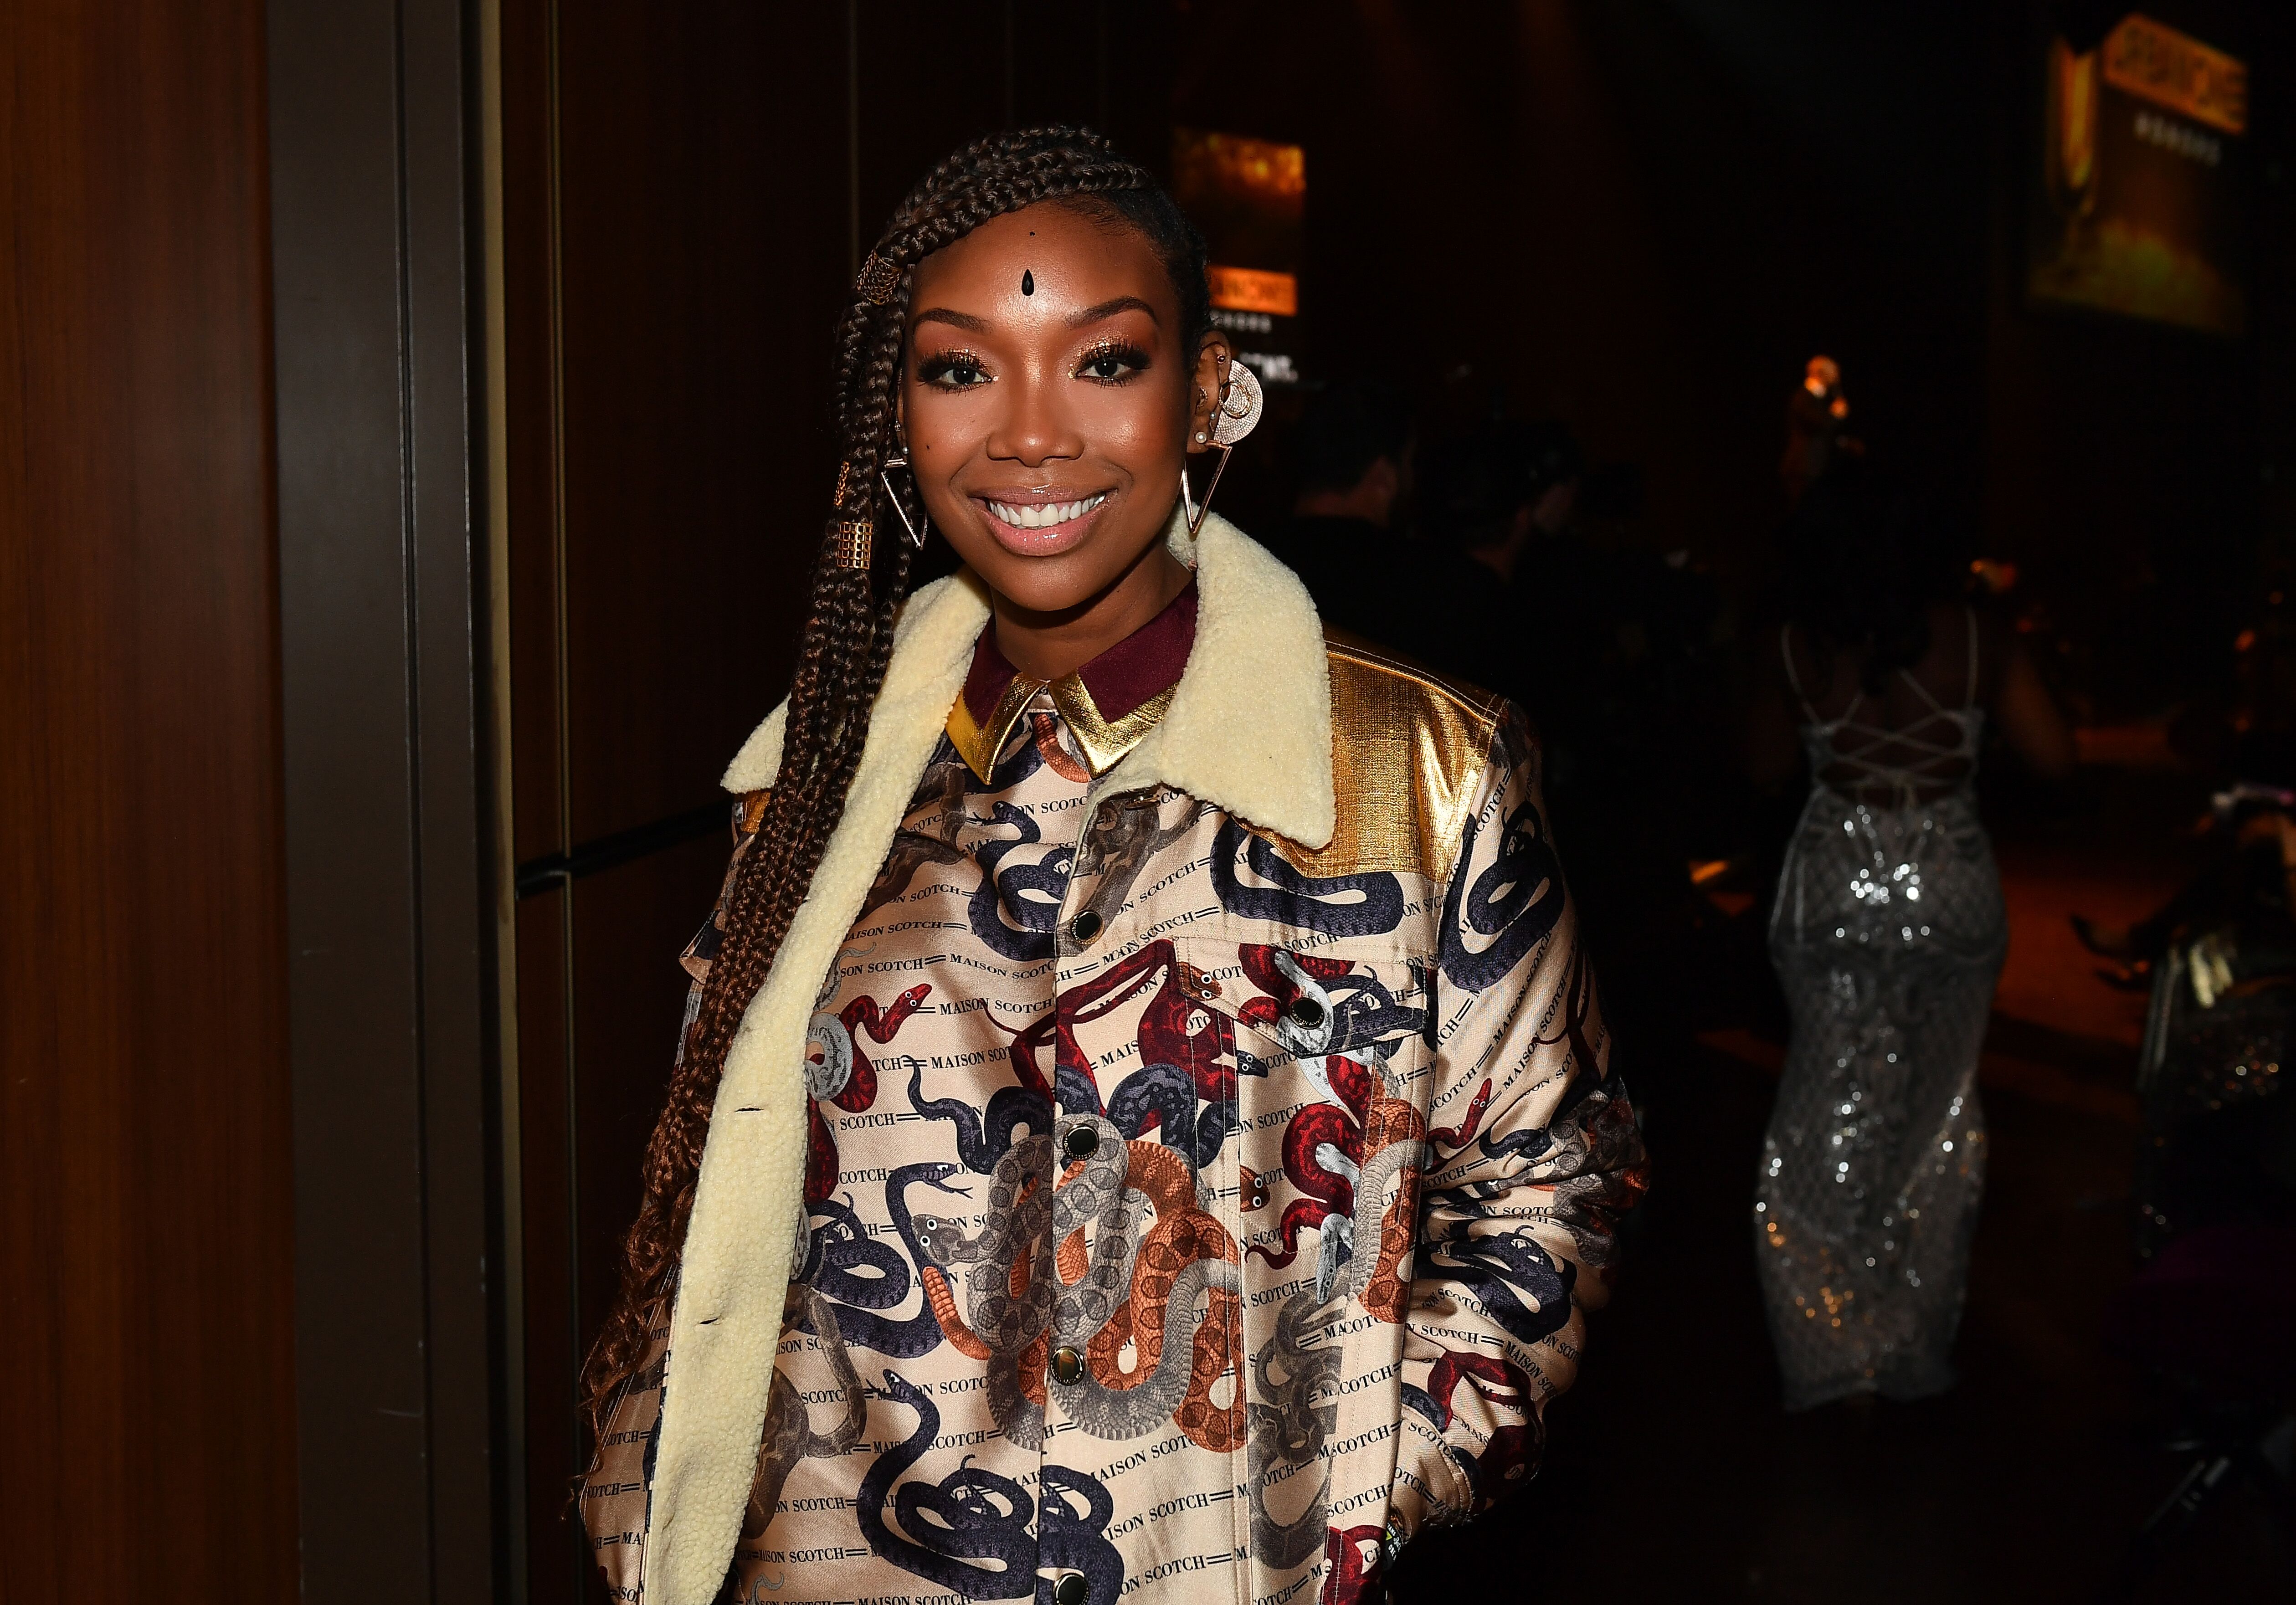  Brandy at the 2019 Urban One Honors in December 2019 | Source: Getty Images